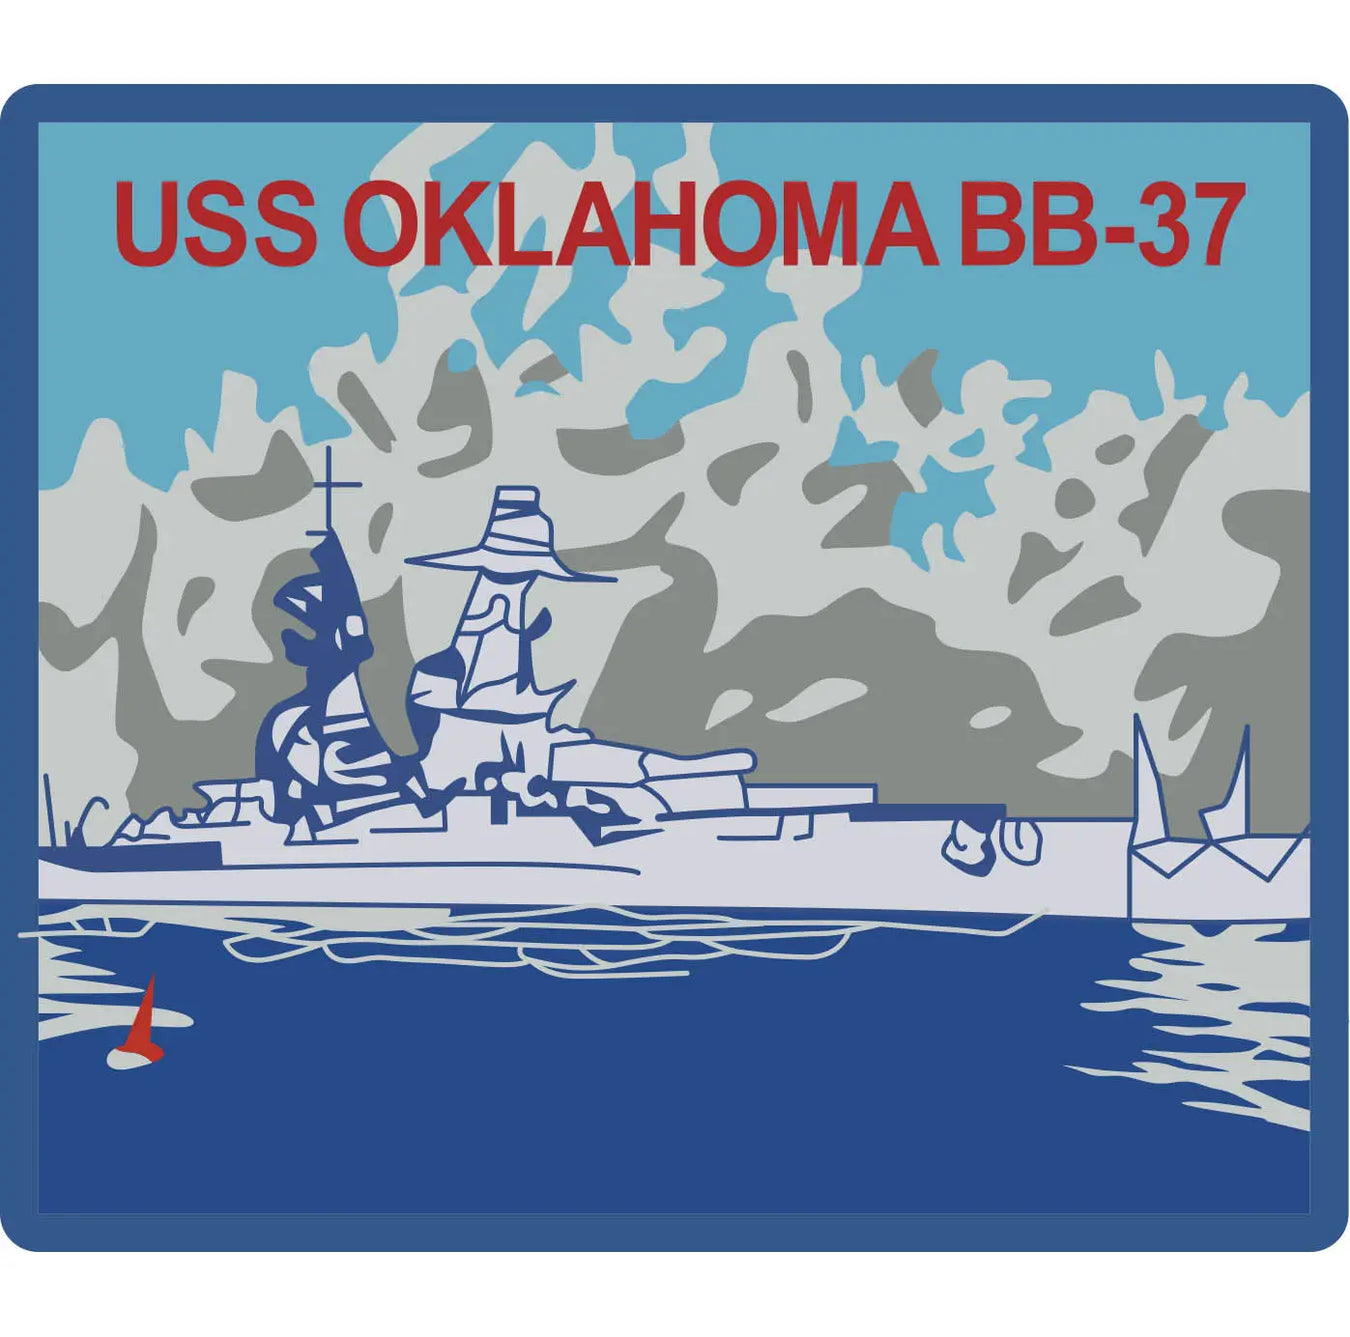 USS Oklahoma (BB-37) Merchandise - Shop T-Shirts, hoodies, patches, pins, flags, decals, hats and more.